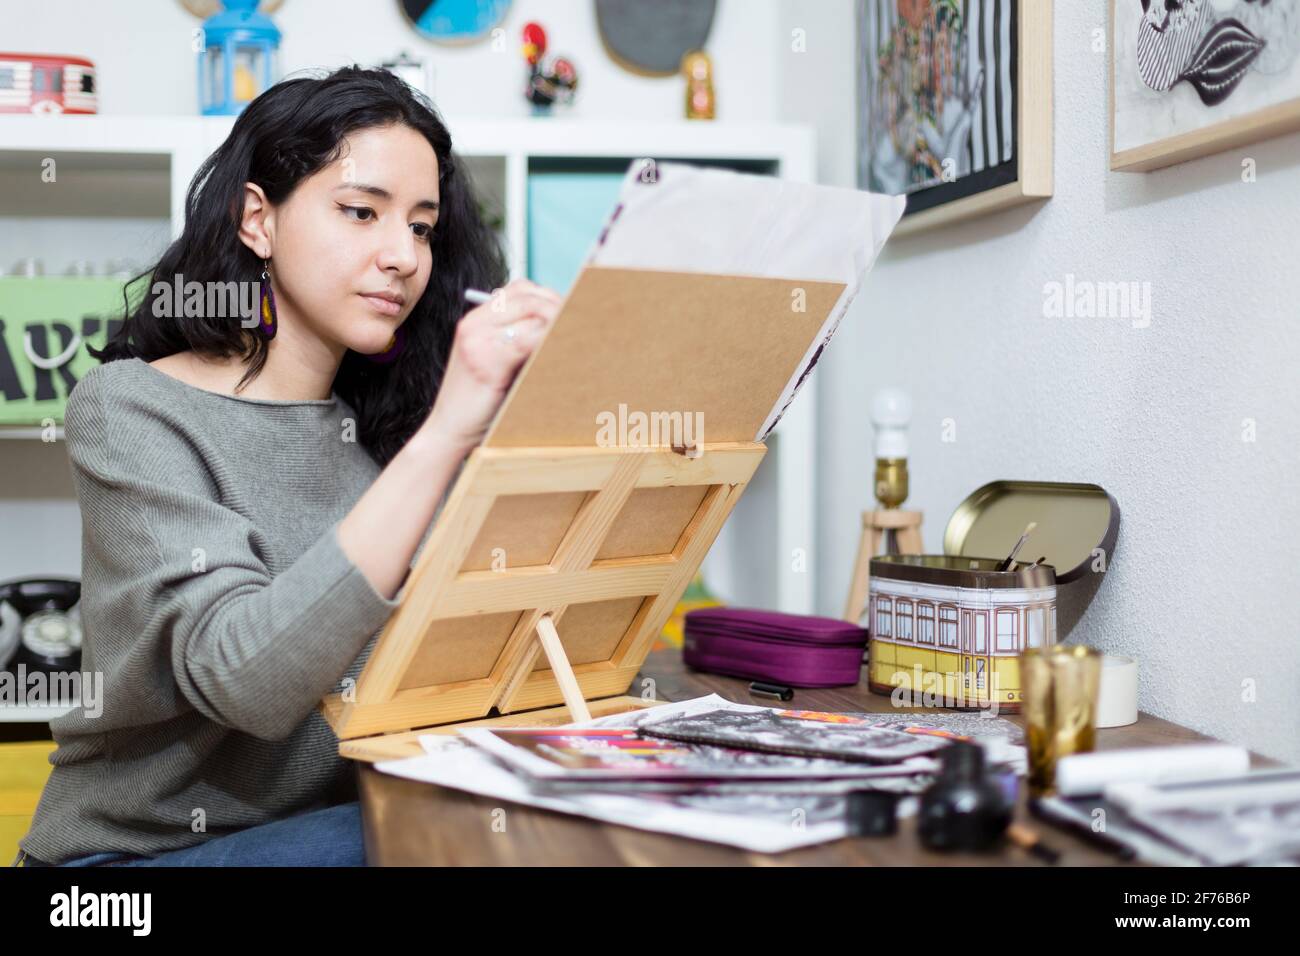 Young woman artist concentrating on the project she is working on. Home entertainment concept. Stock Photo